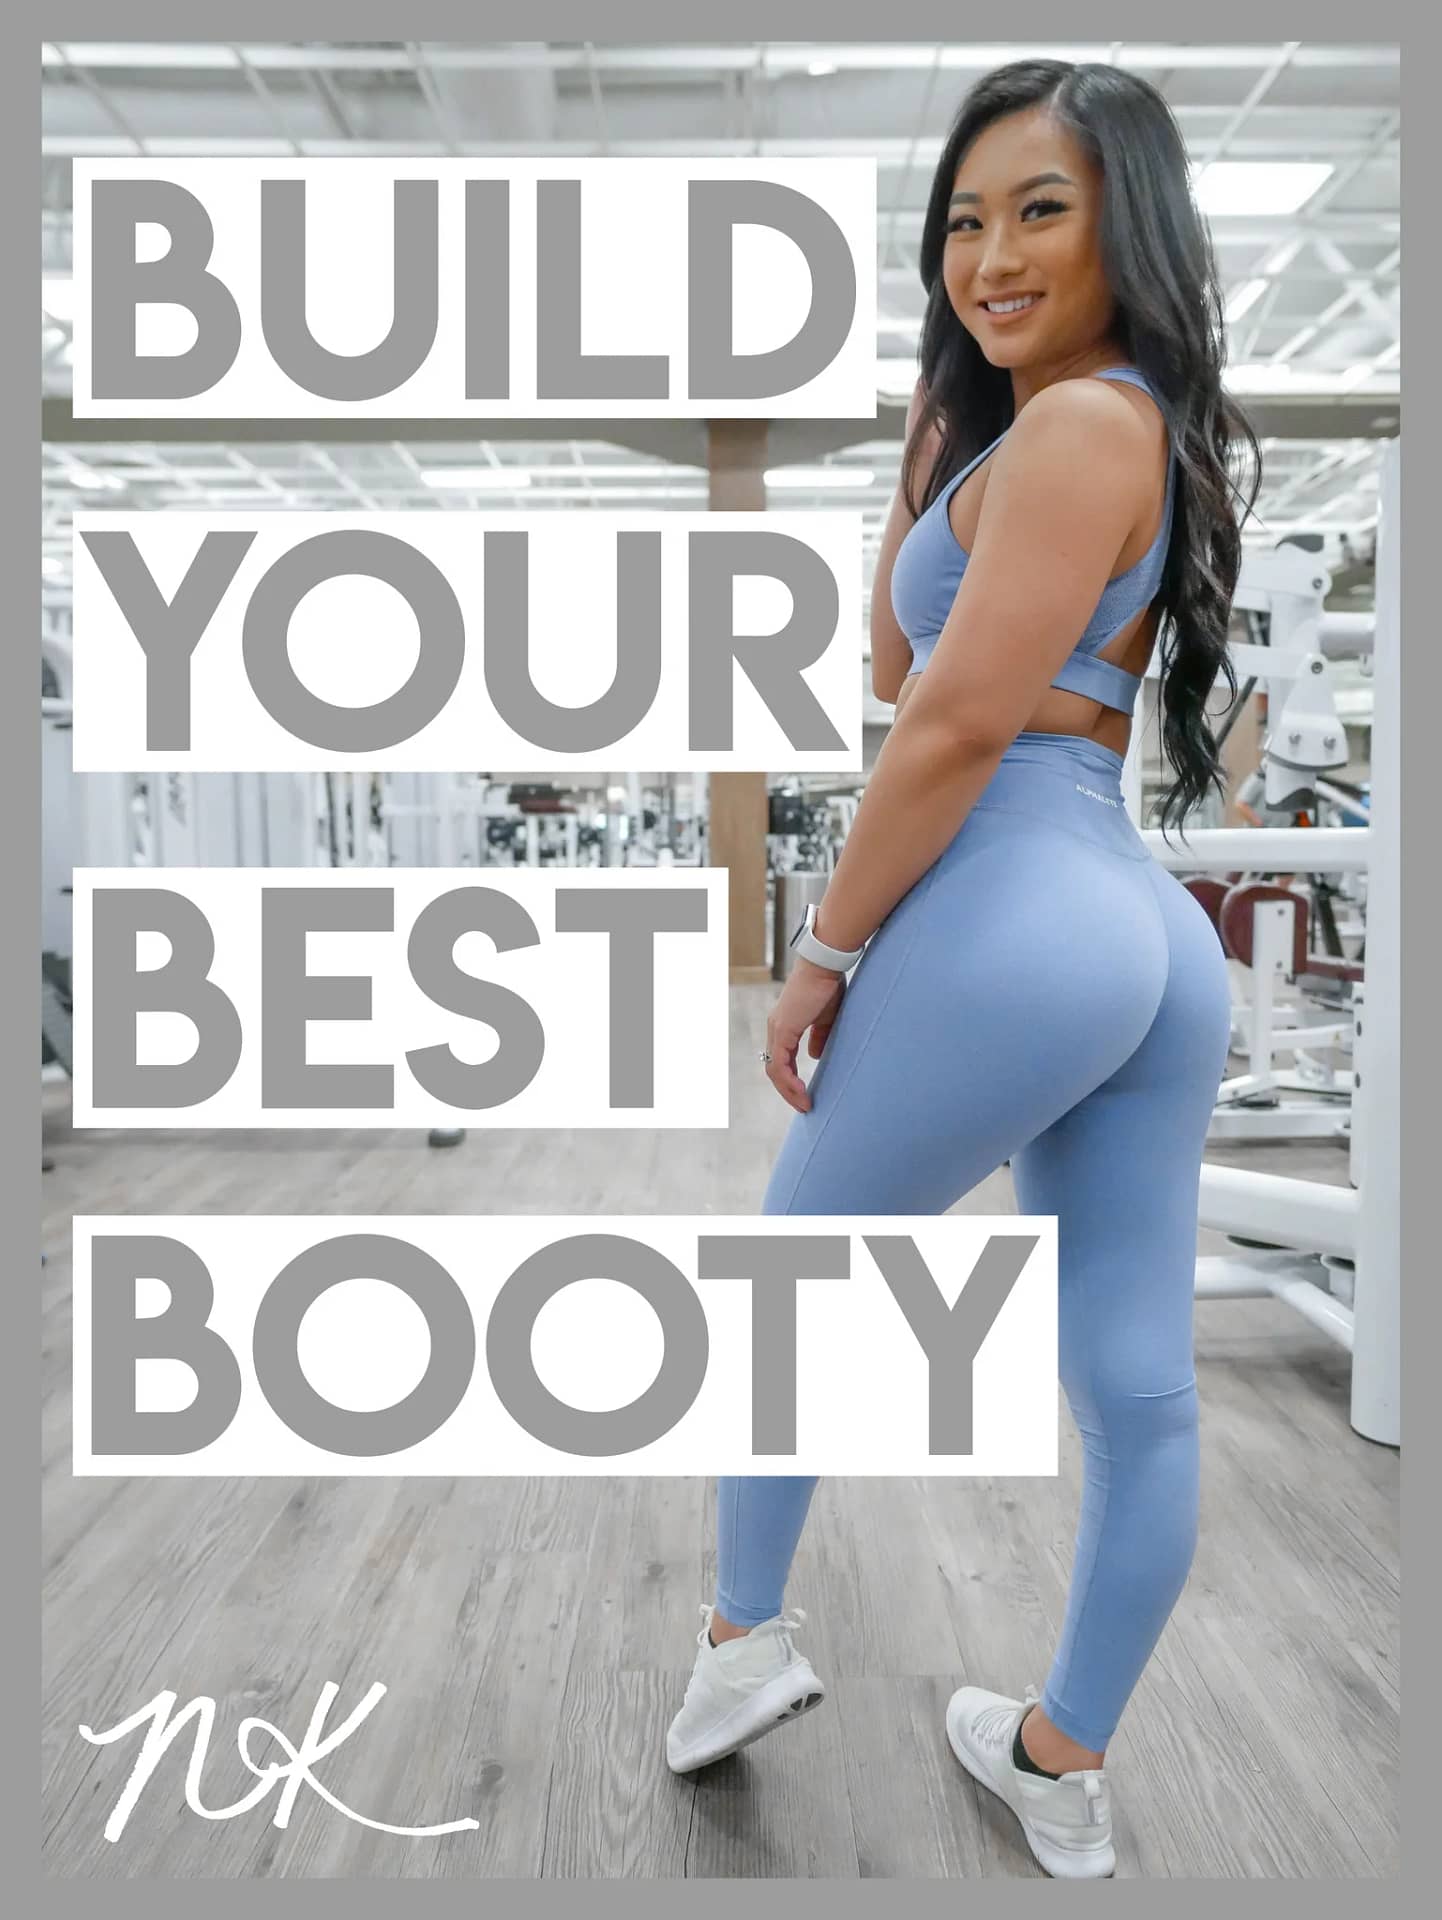 Build_Your_Best_Booty_Workout_Guide_Cover_1024x1024@2x